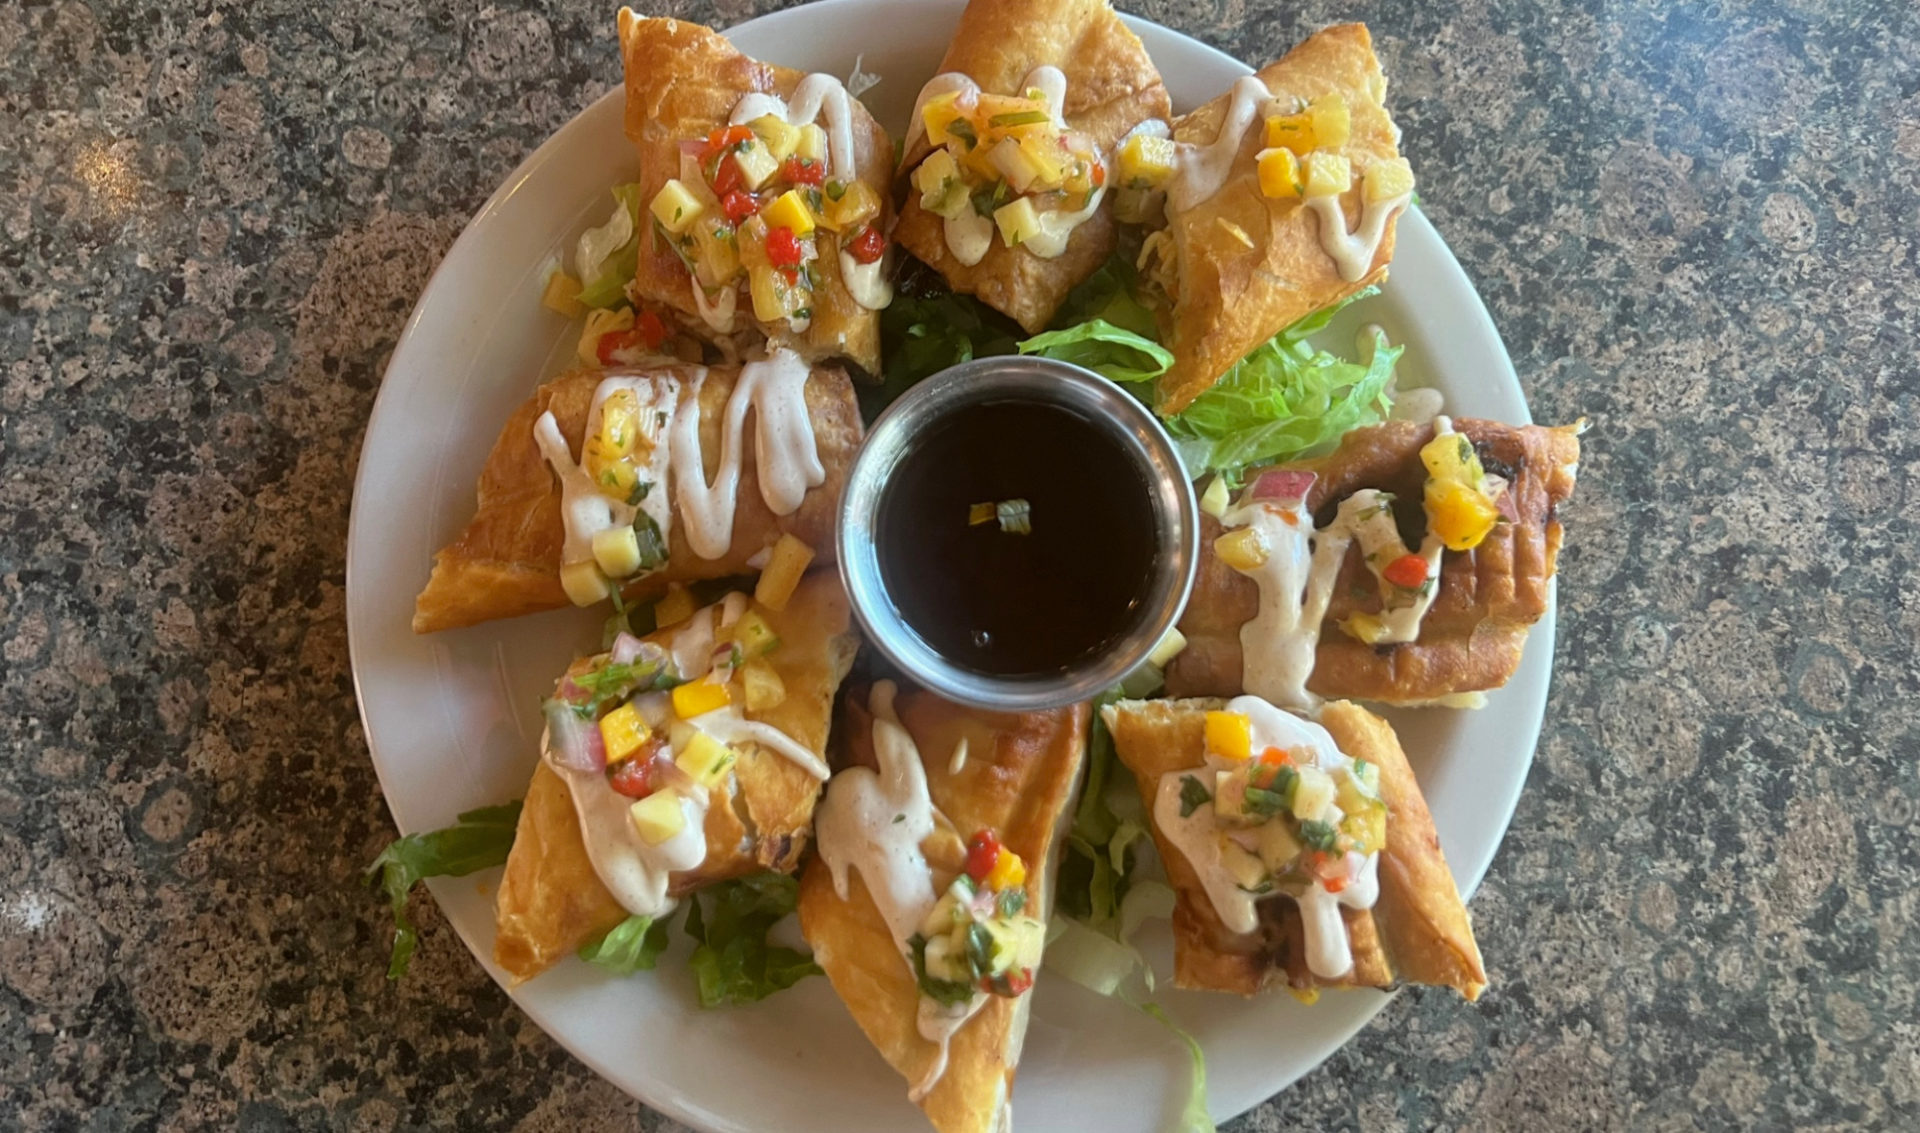 An order of chicken flautas from Seven Saints restaurant in Champaign, Illinois.